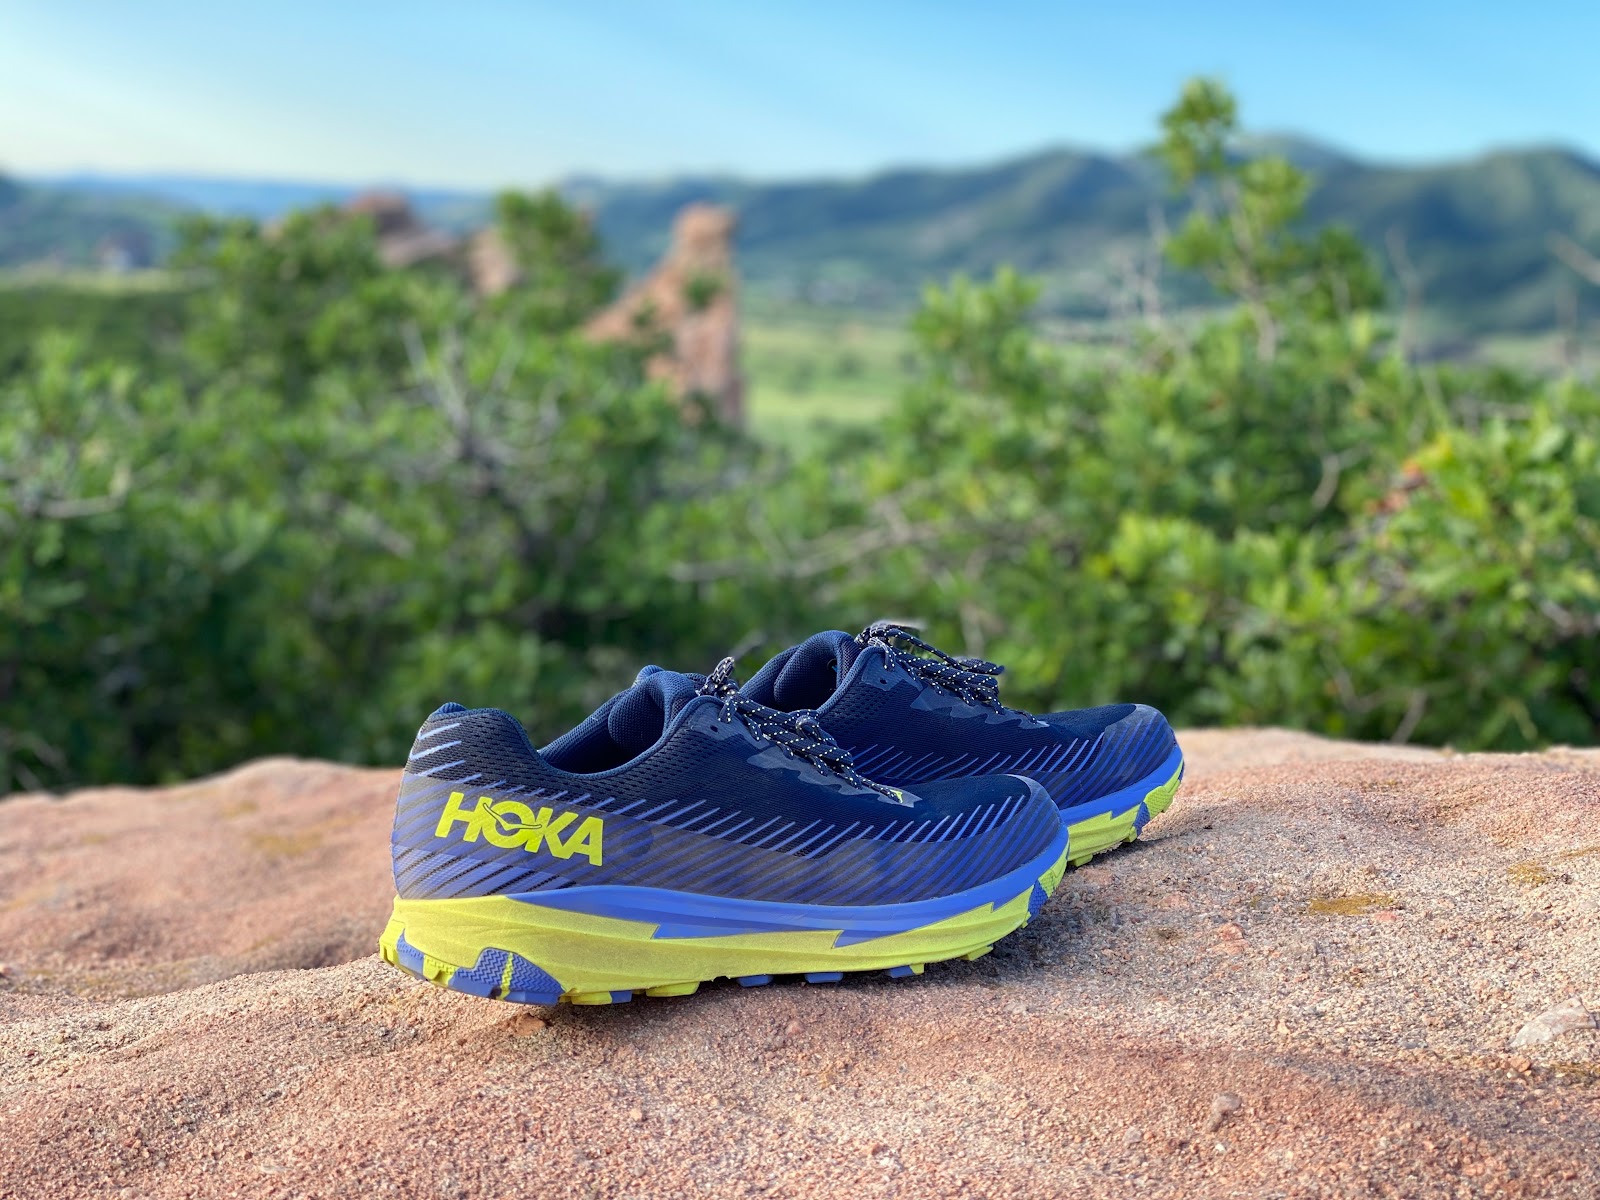 Road Trail Run: Hoka One One Torrent 2 Multi Tester Review: Intangible  Spark! A Super Versatile, Forgiving & Light Trail Runner with Improved  Traction and Upper Fit